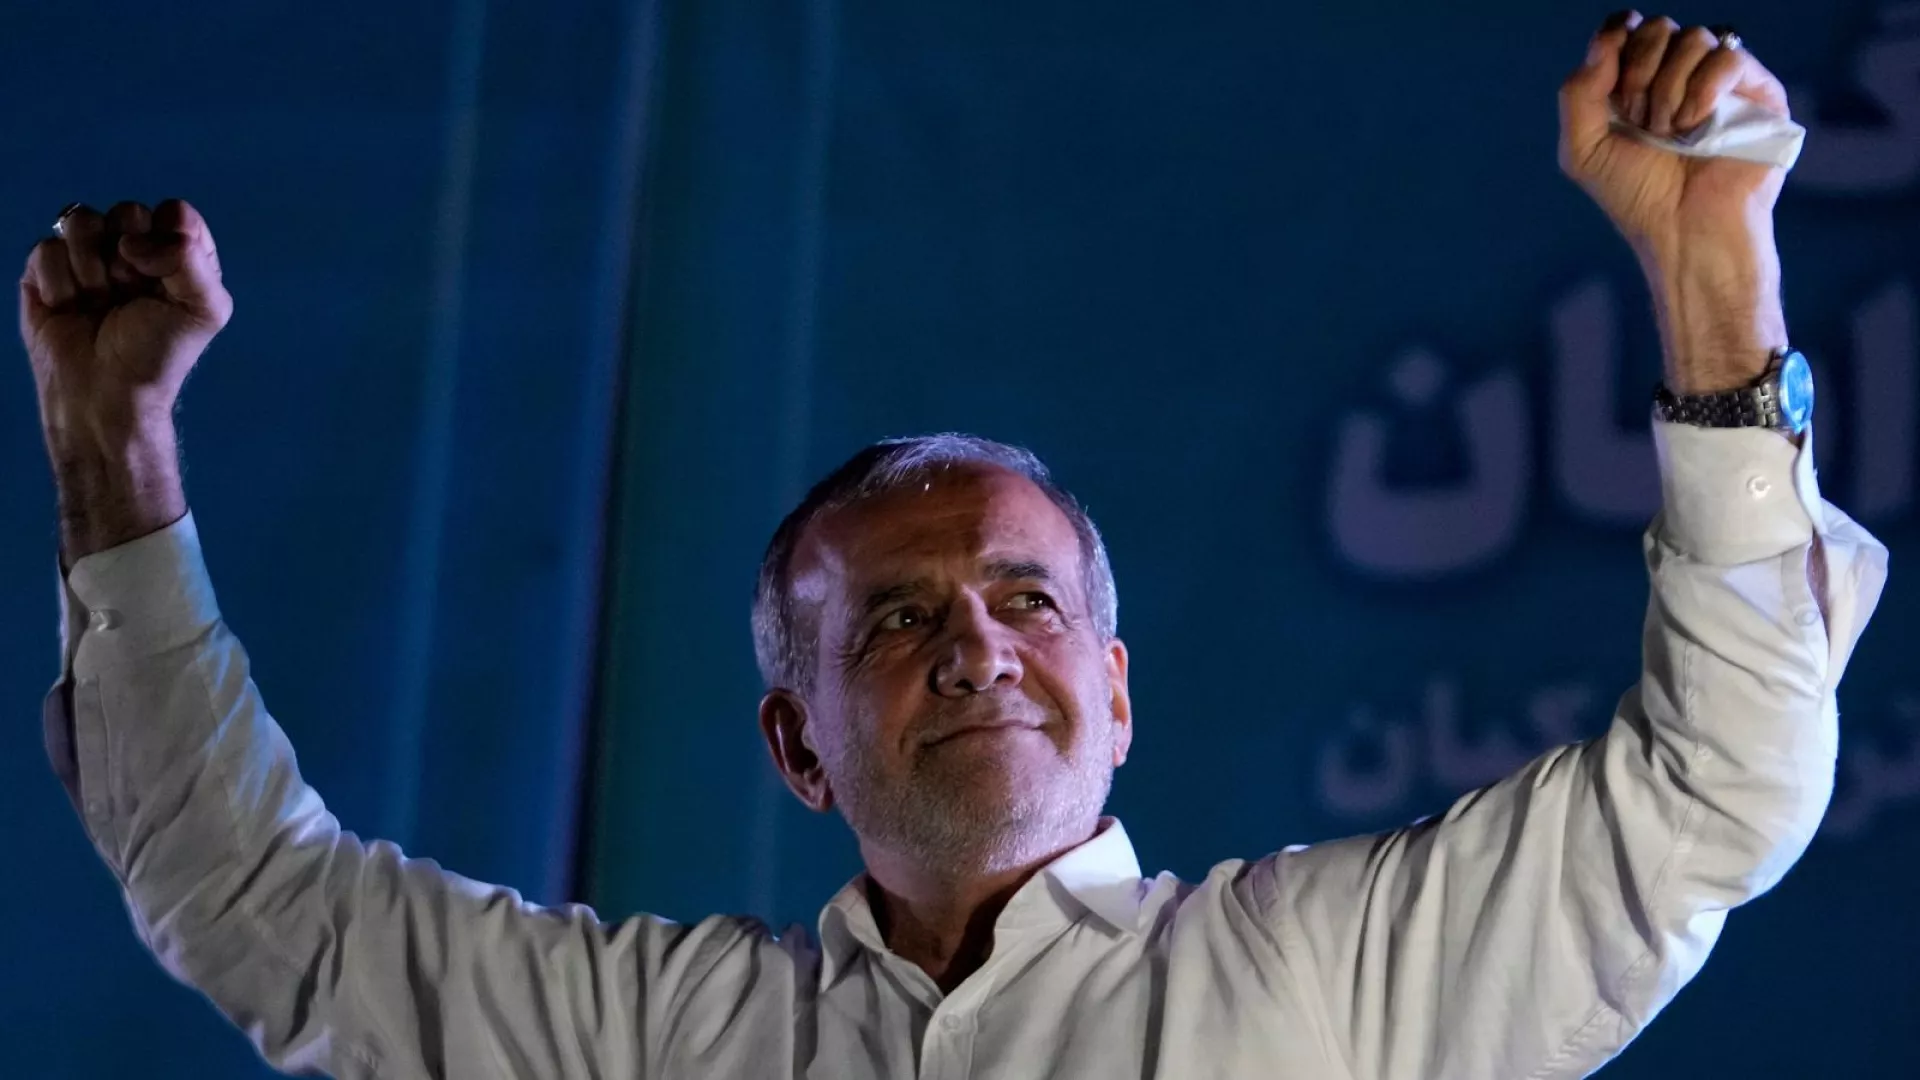 At the end of the counting of votes, Masoud Mezikian was elected president with the majority of vote